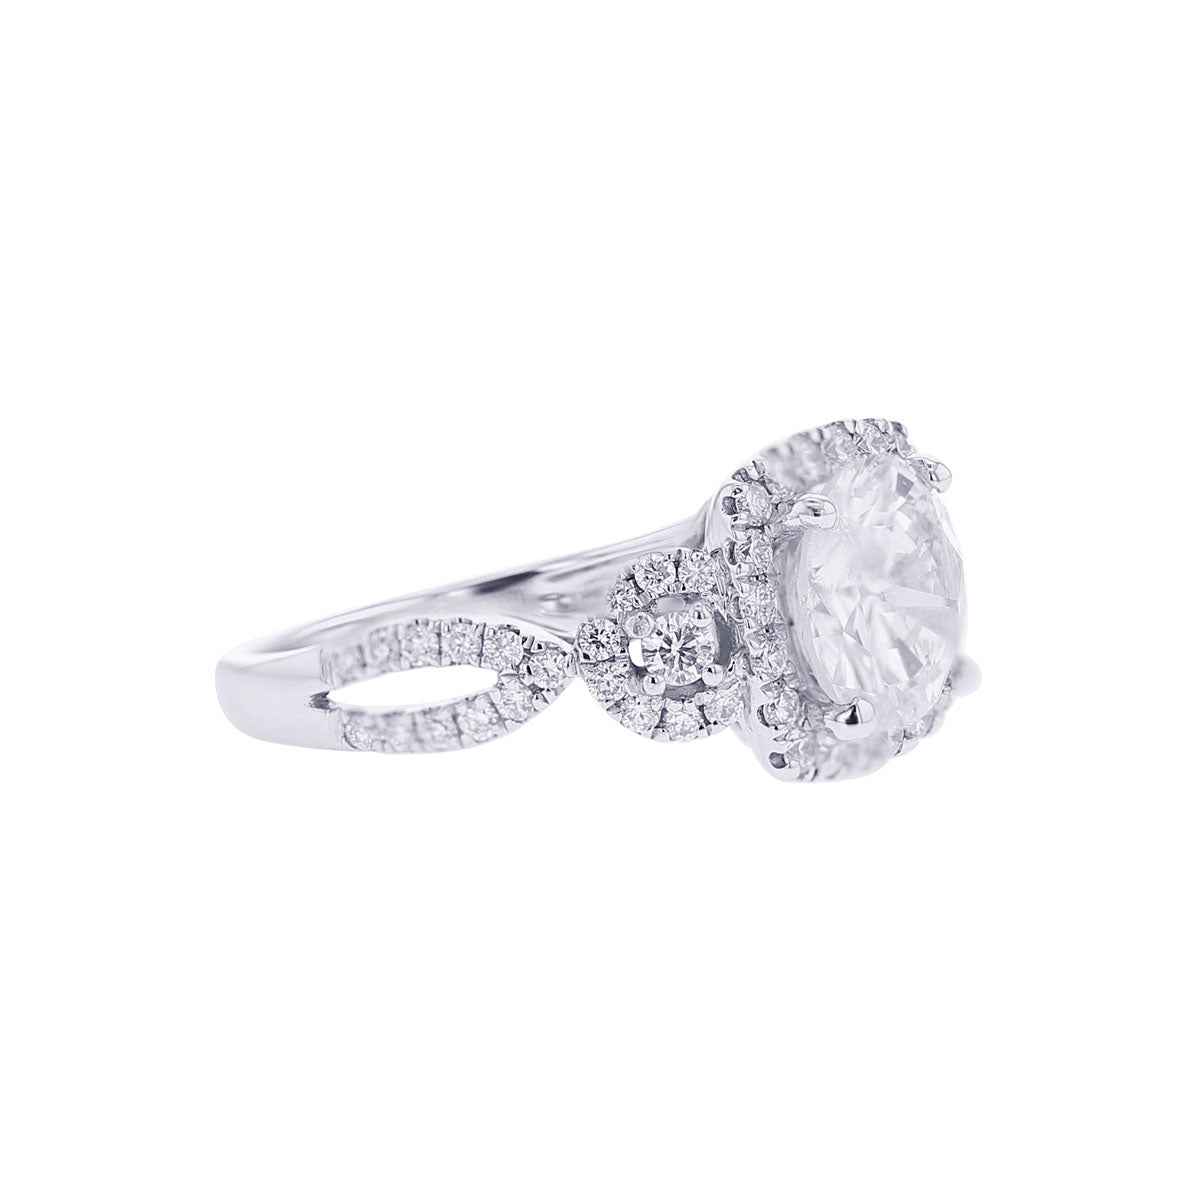 Serafina Ready for Love Engagement Ring 2 7/8ct